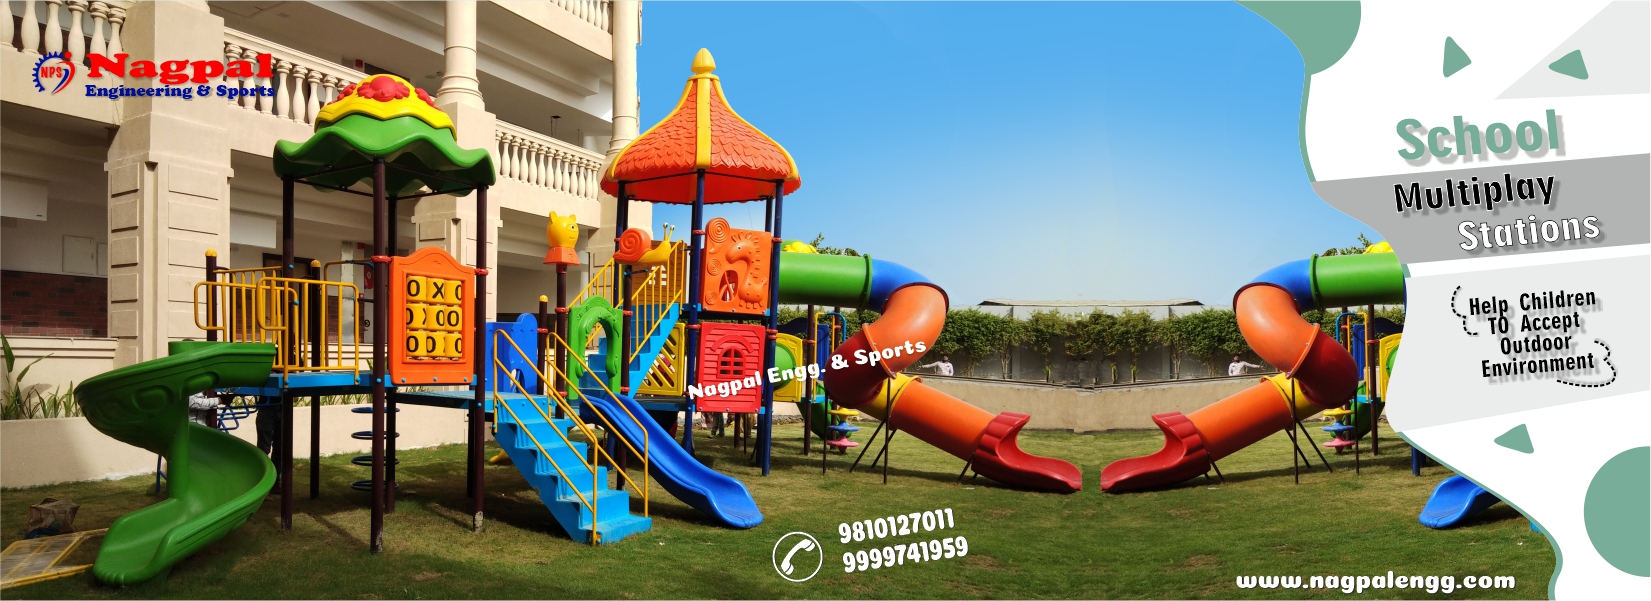 Roto Multiplay System Manufacturers, Exporters & Suppliers in Allahabad